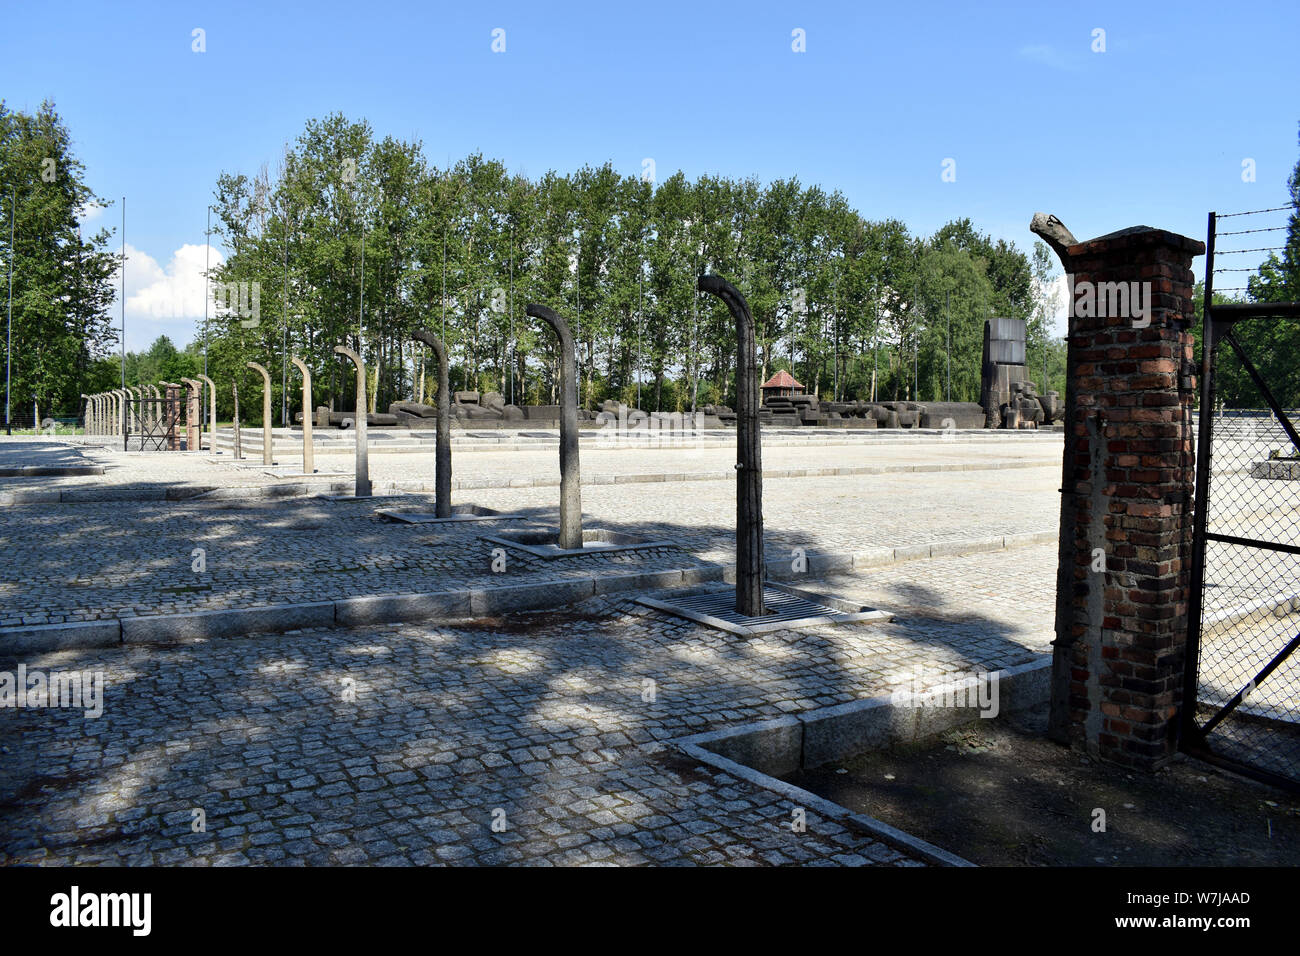 Birkenau/Poland-June 3, 2019: A distant view of the International Memorial taken through the remains of an electrified fence at the Birkenau Concentra Stock Photo